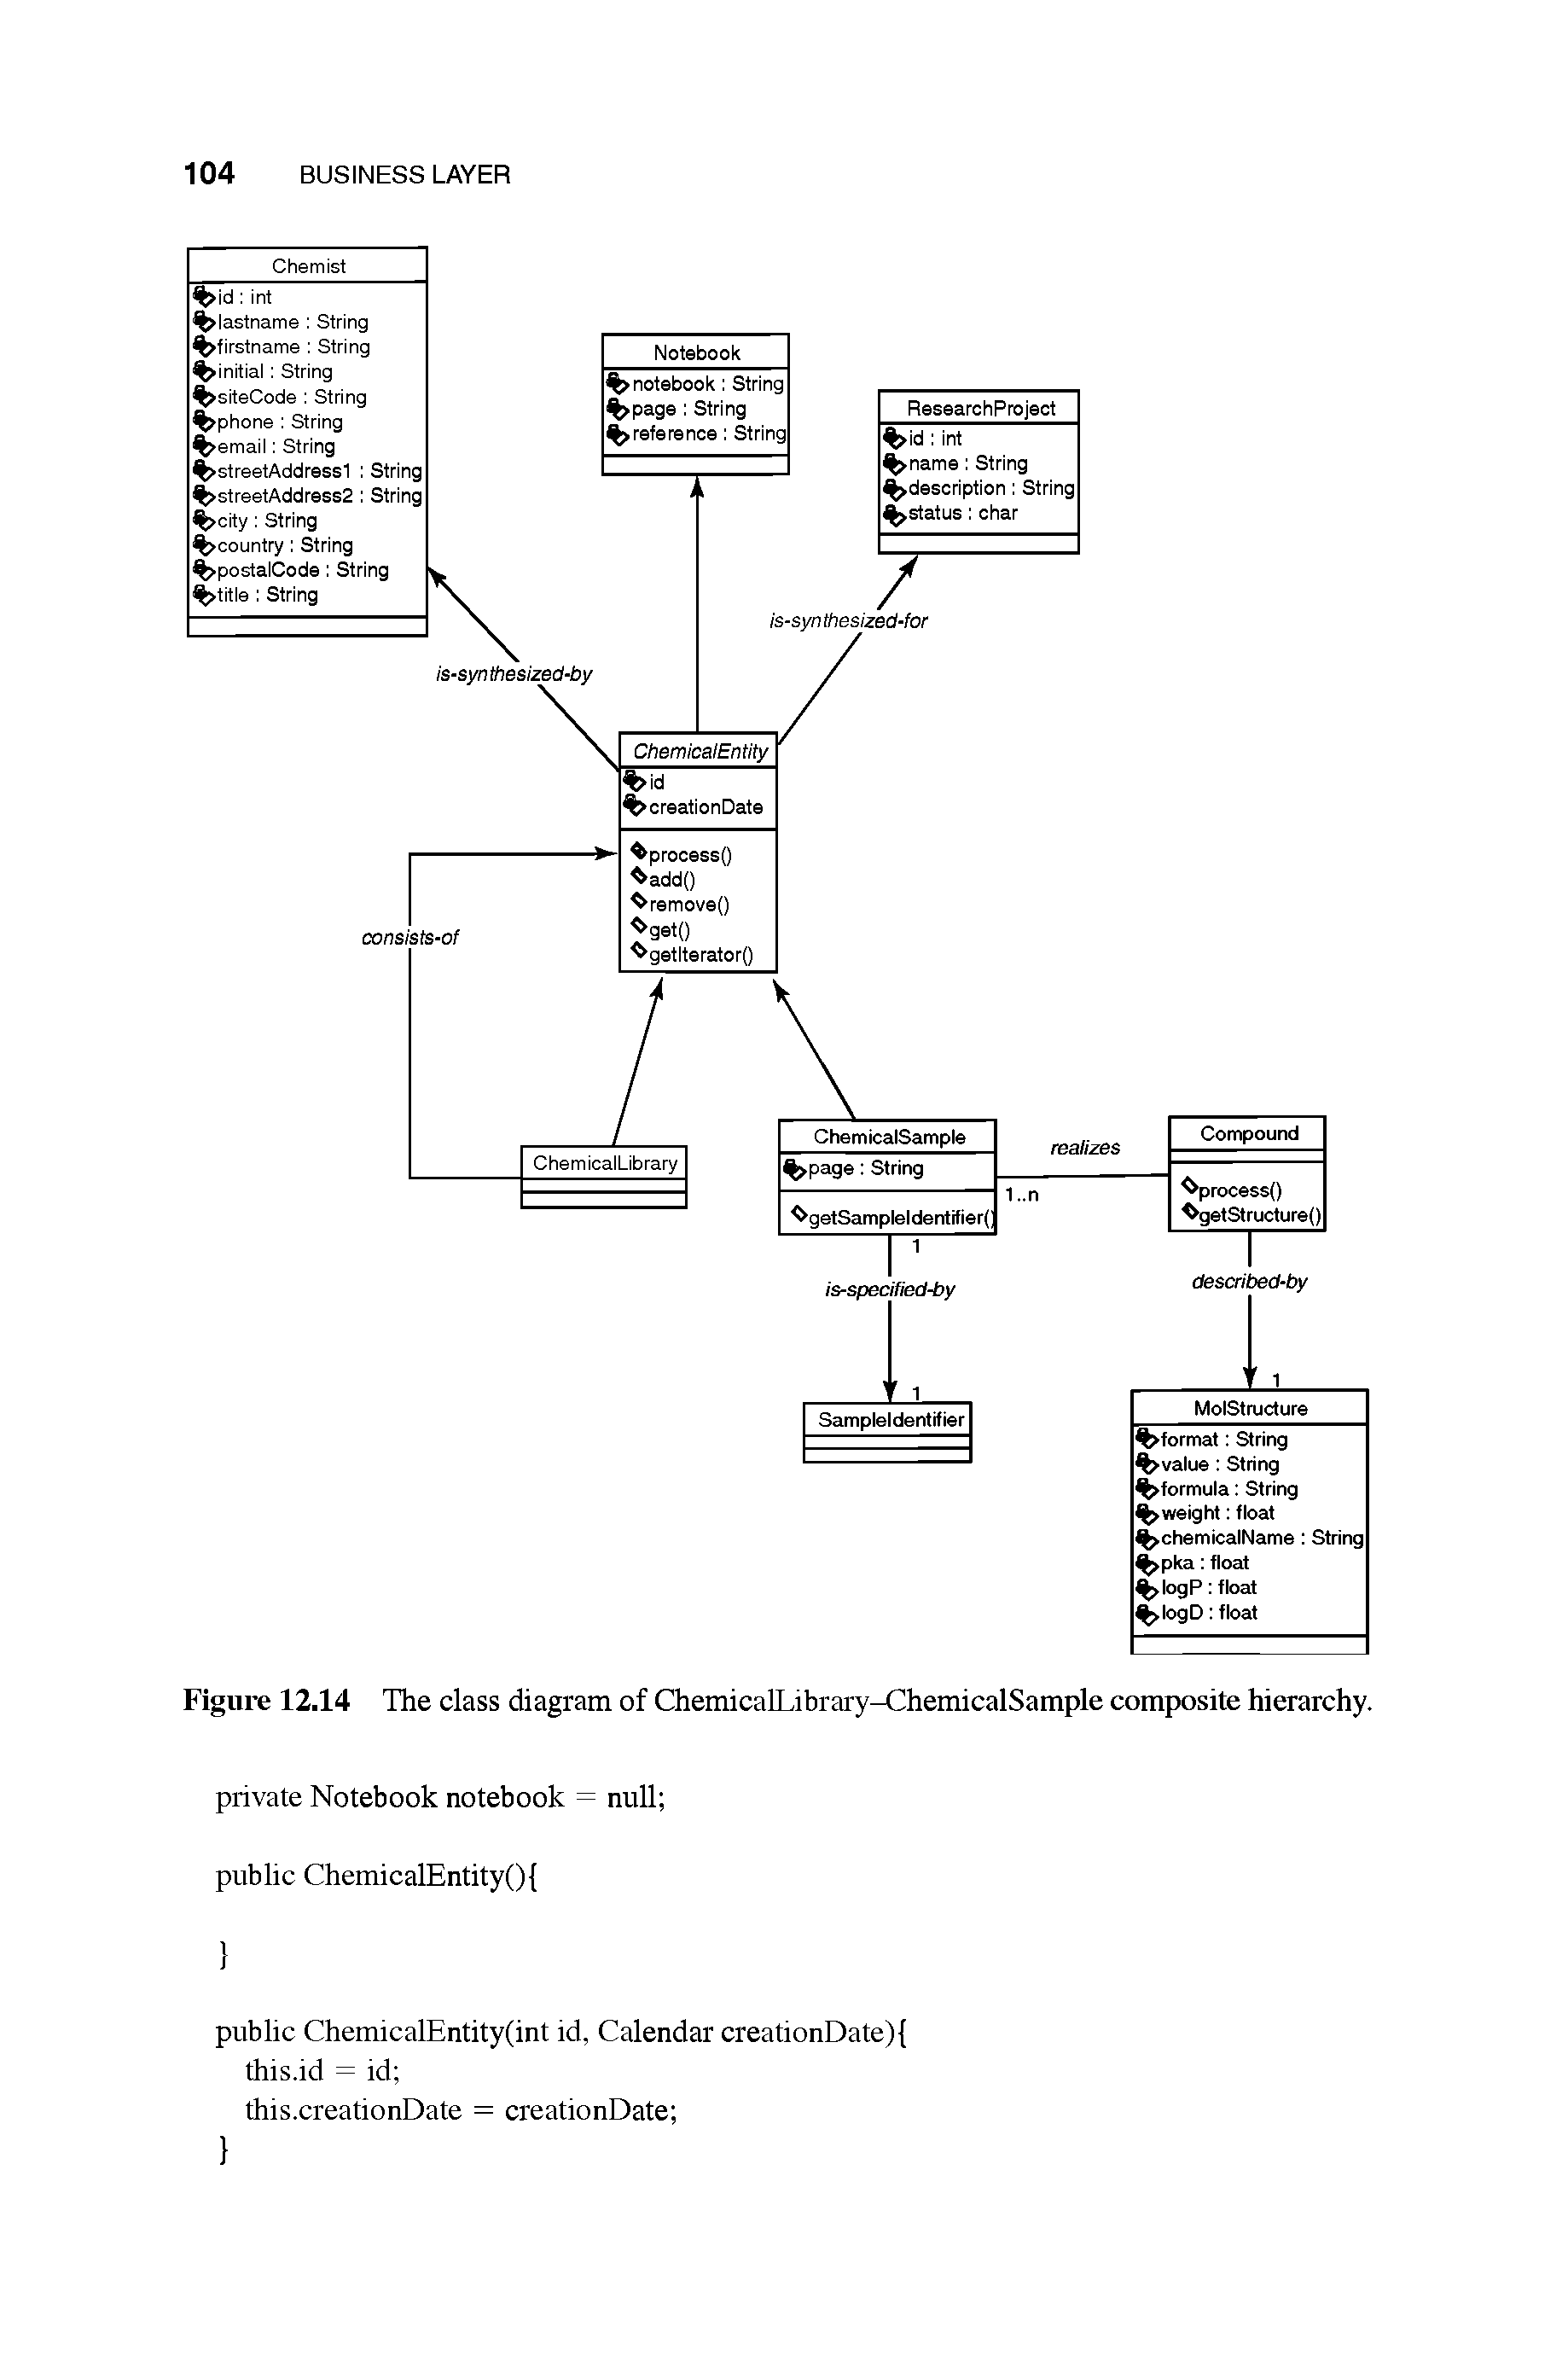 Figure 12.14 The class diagram of ChemicalLibrary-ChemicalSample composite hierarchy.